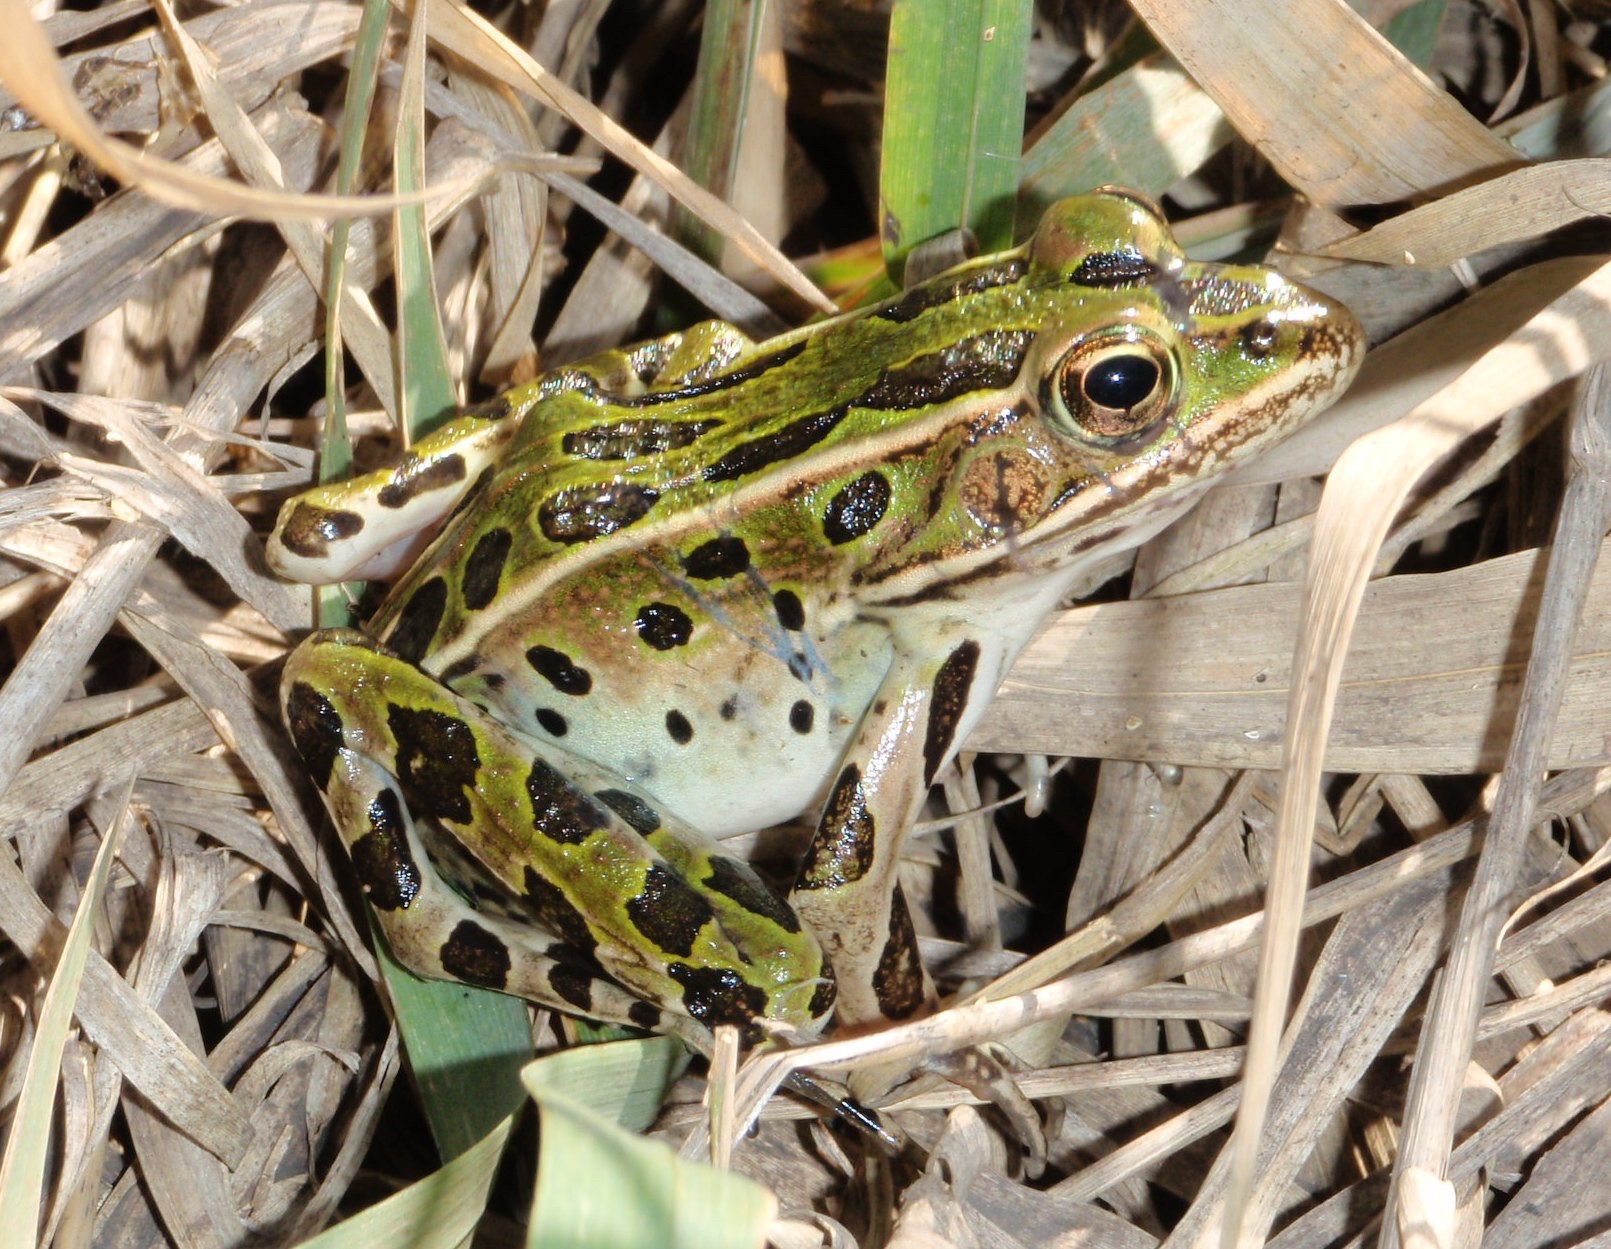 Climate Change and Phenology: Evaluating Temperature, Precipitation, and Phenology of Frogs and Toads in Minnesota